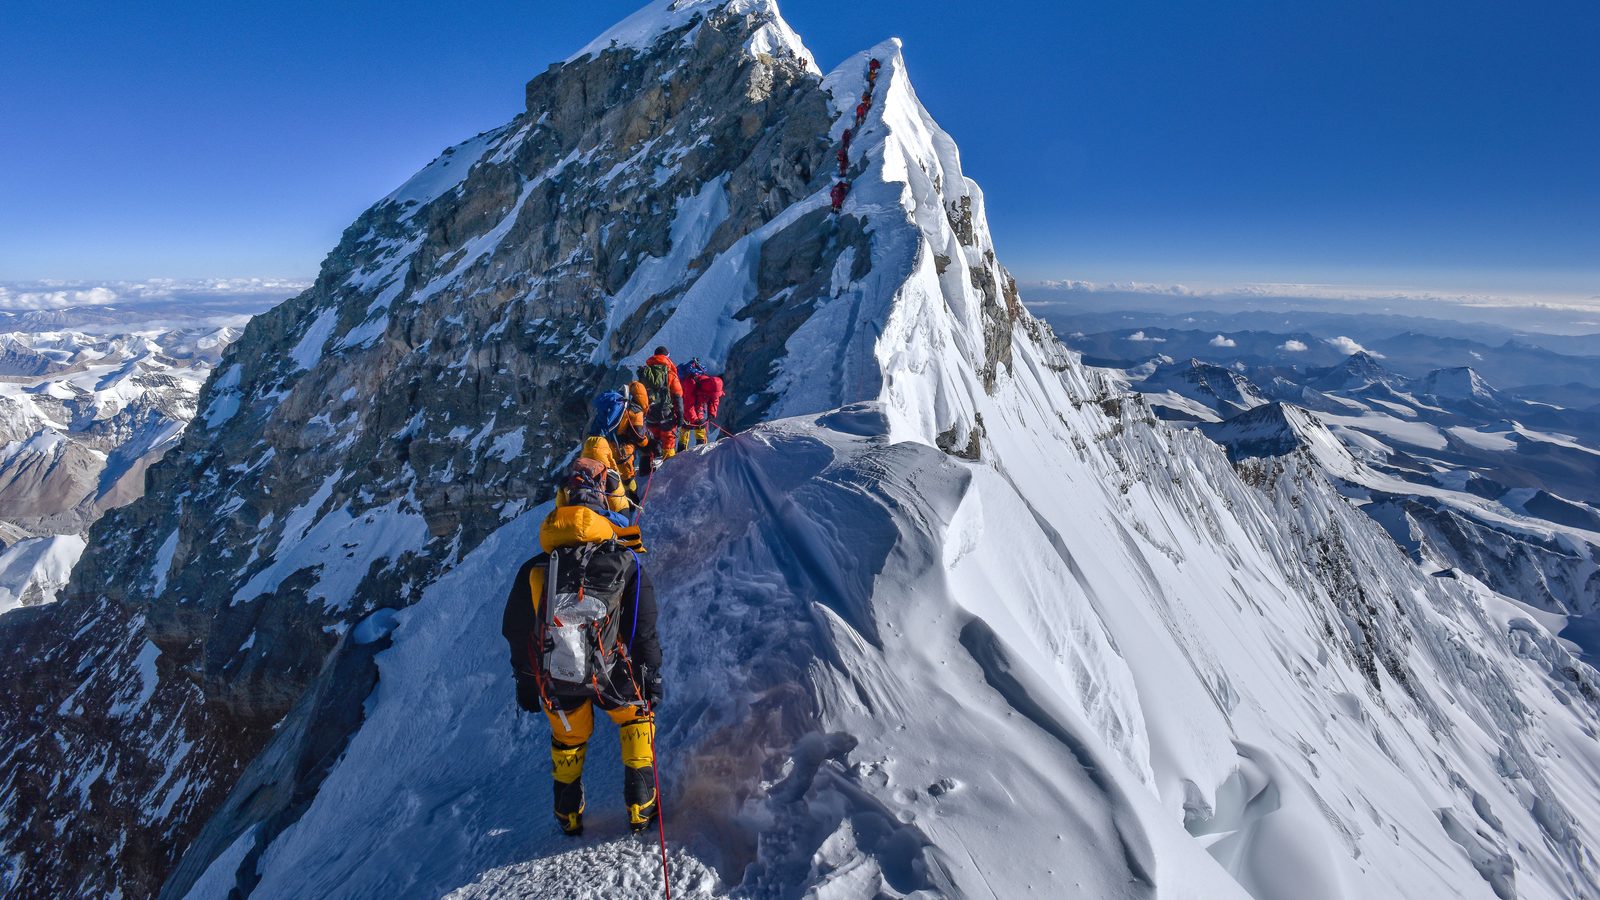 Mount everest is high in the world